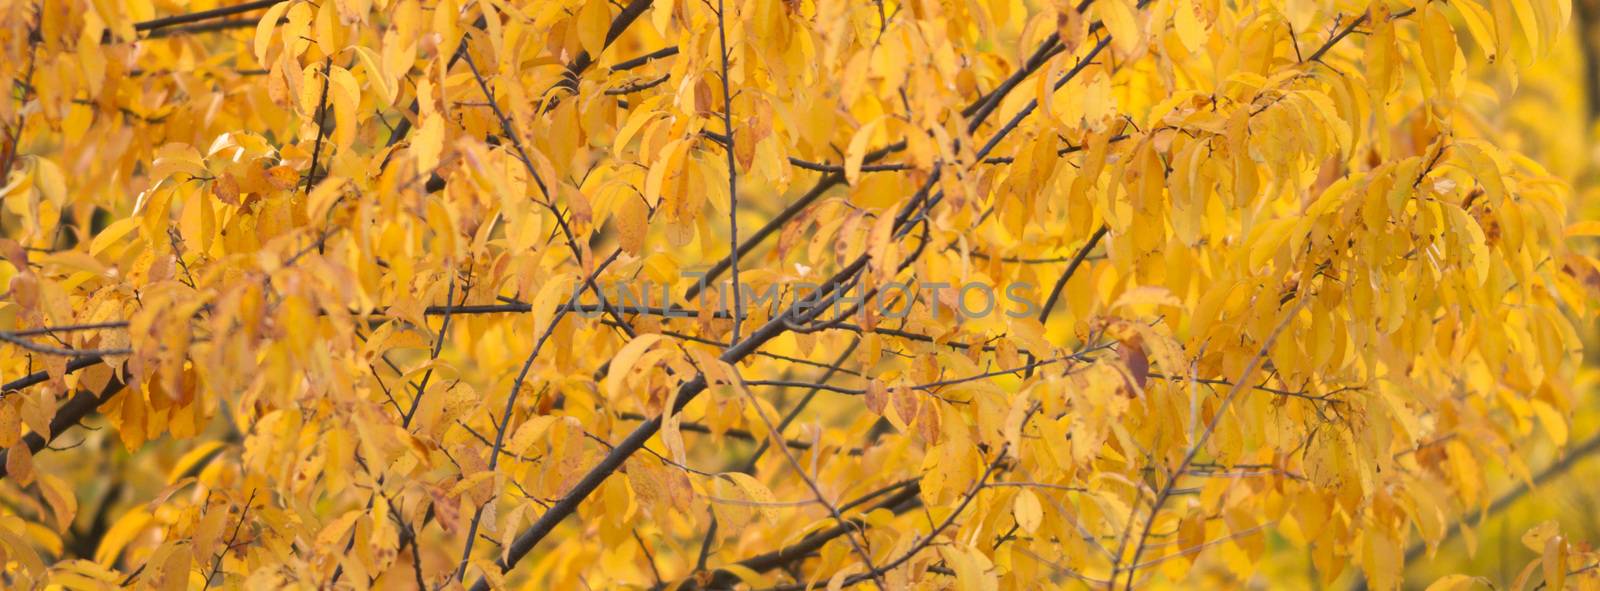 natural background with colored leaves, nature series